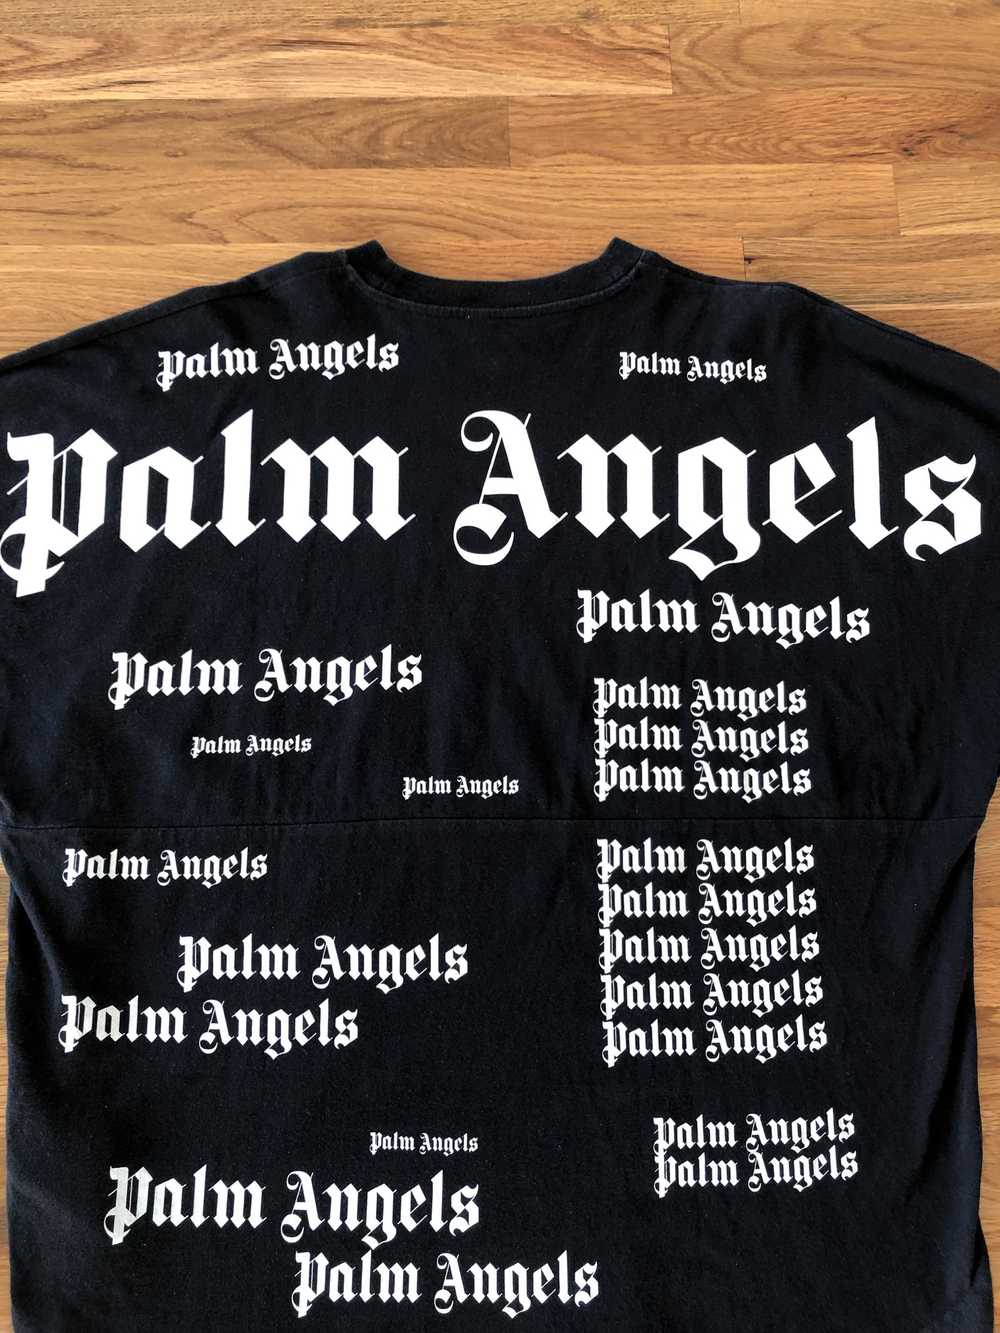 Palm Angels Palm Angels "All Over" T-Shirt - image 4